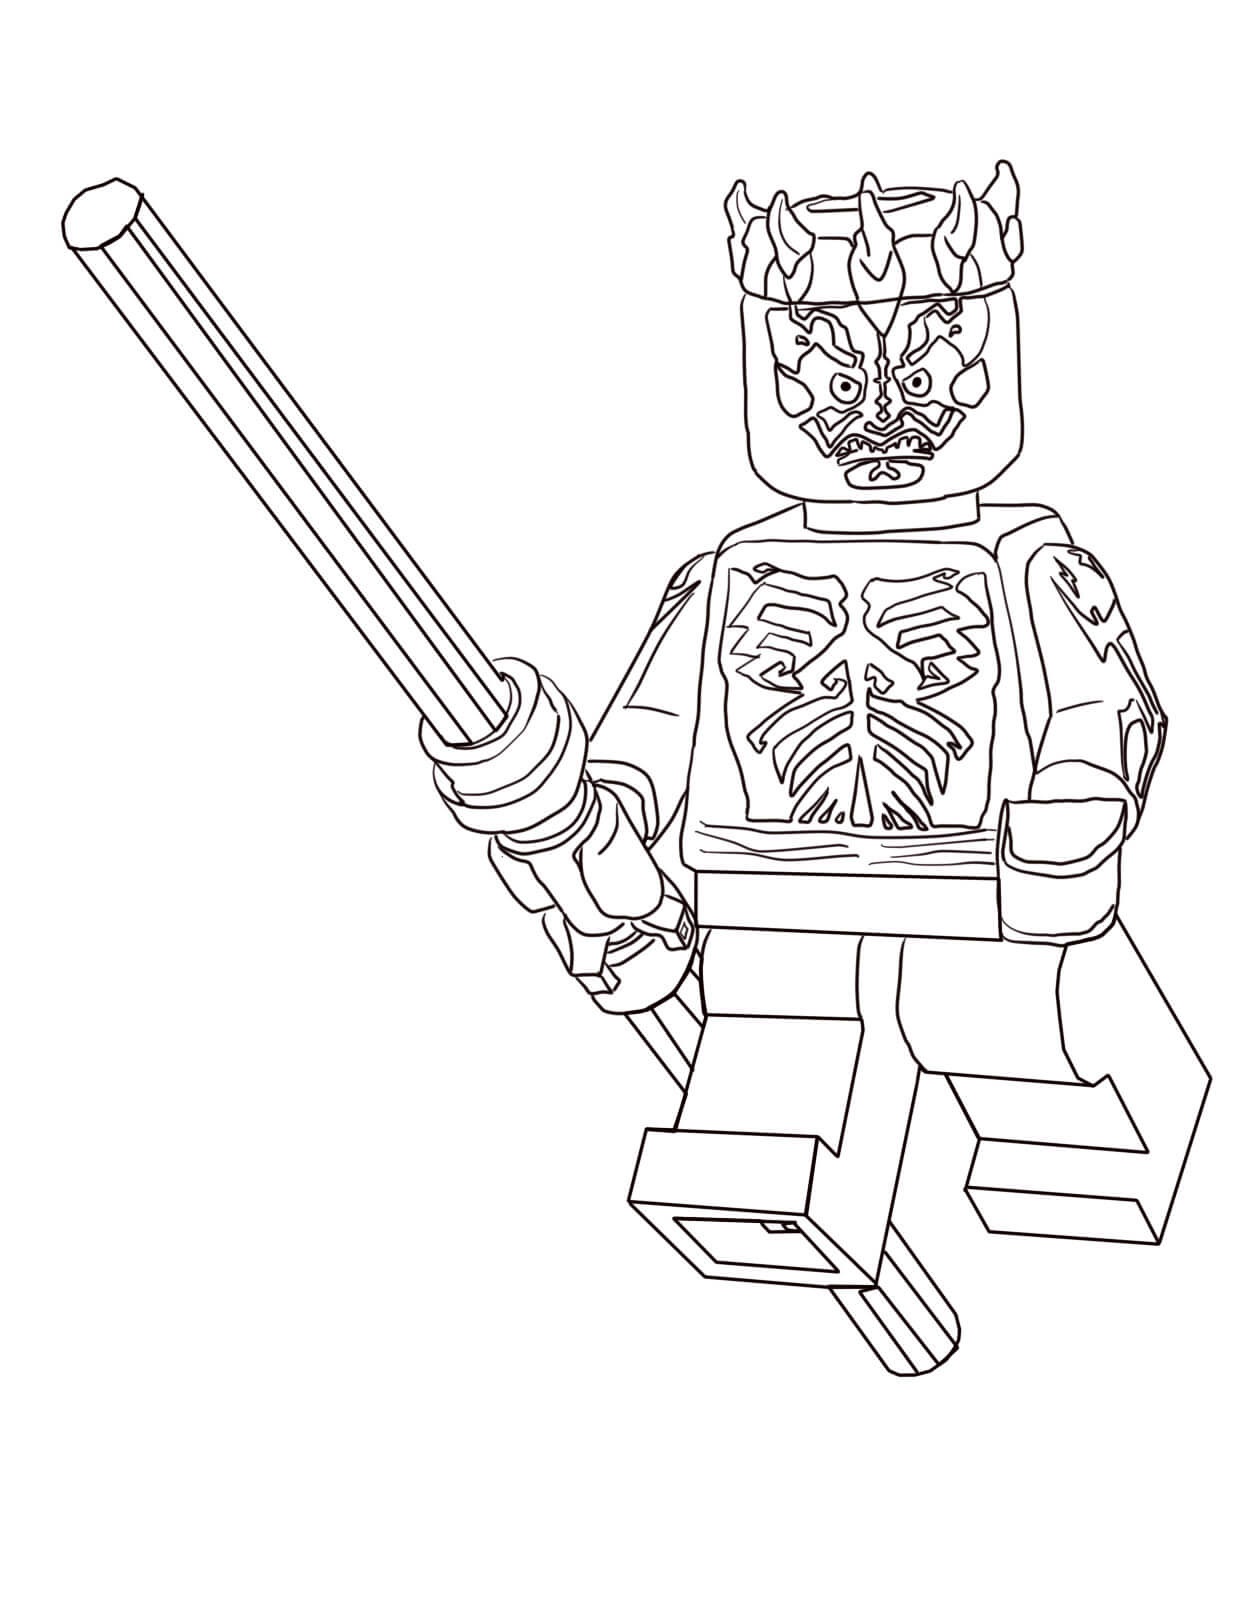 Lego Star Wars 59 Coloring Page